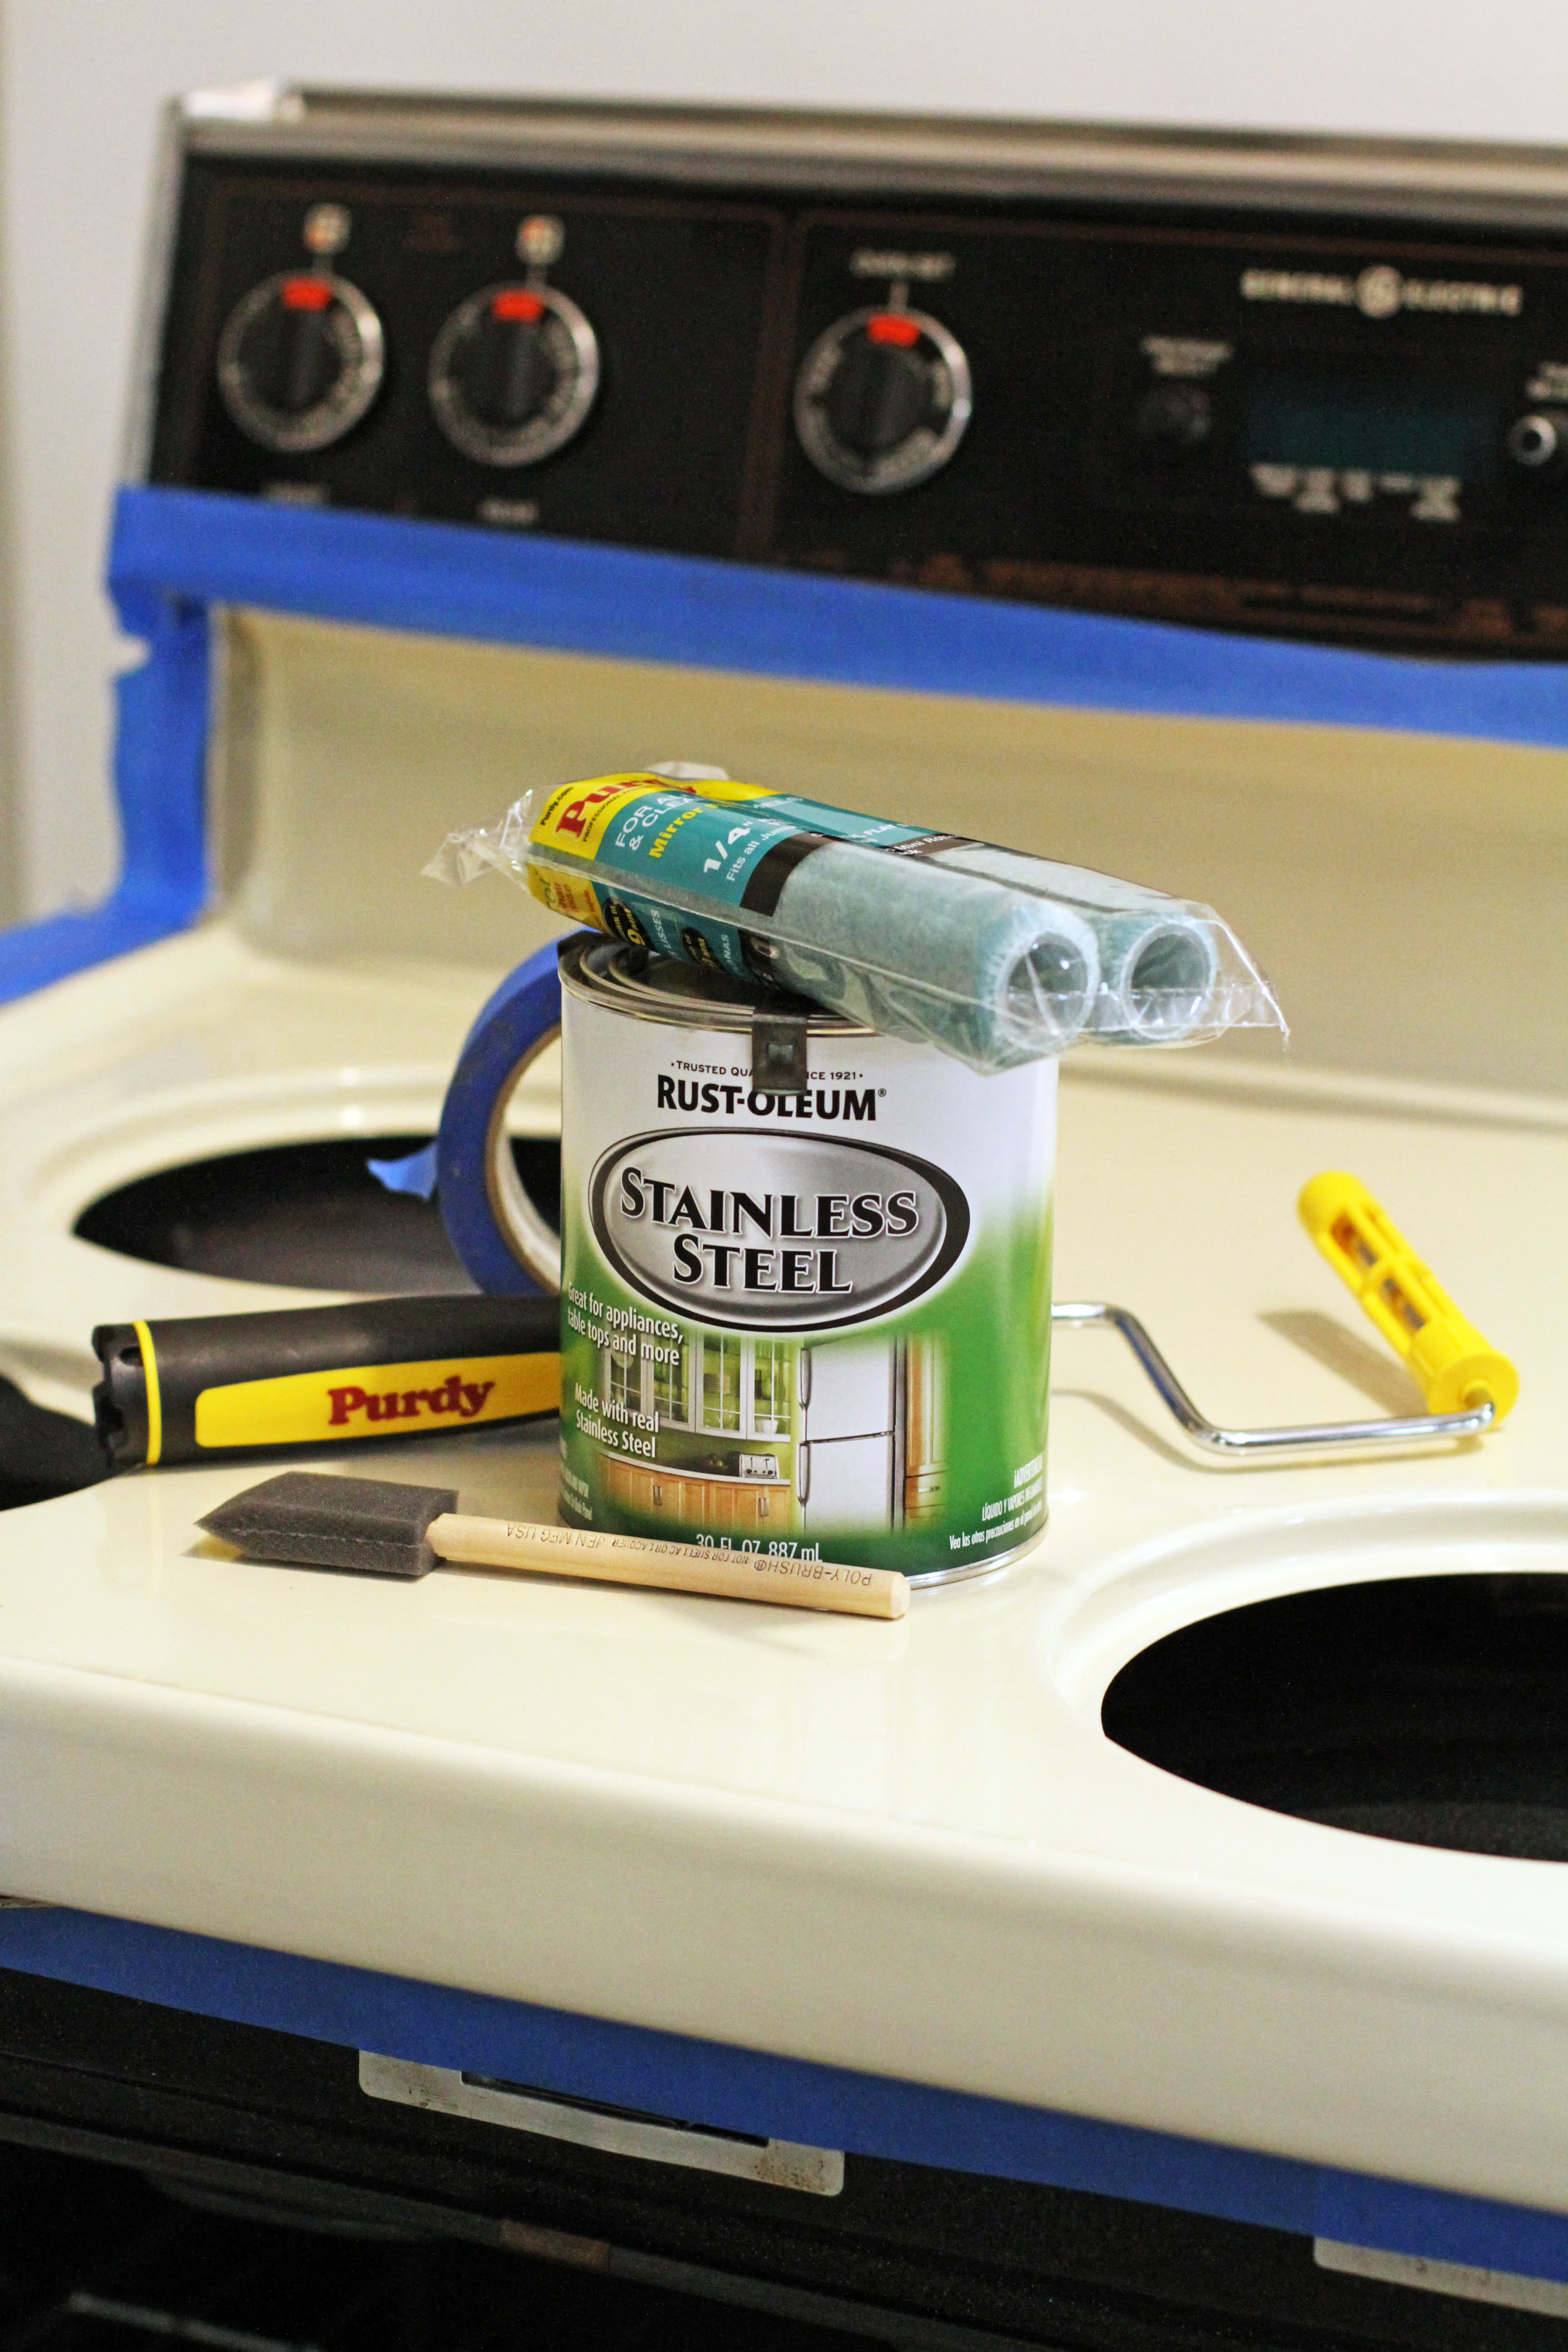 Can You Paint Stainless Steel?